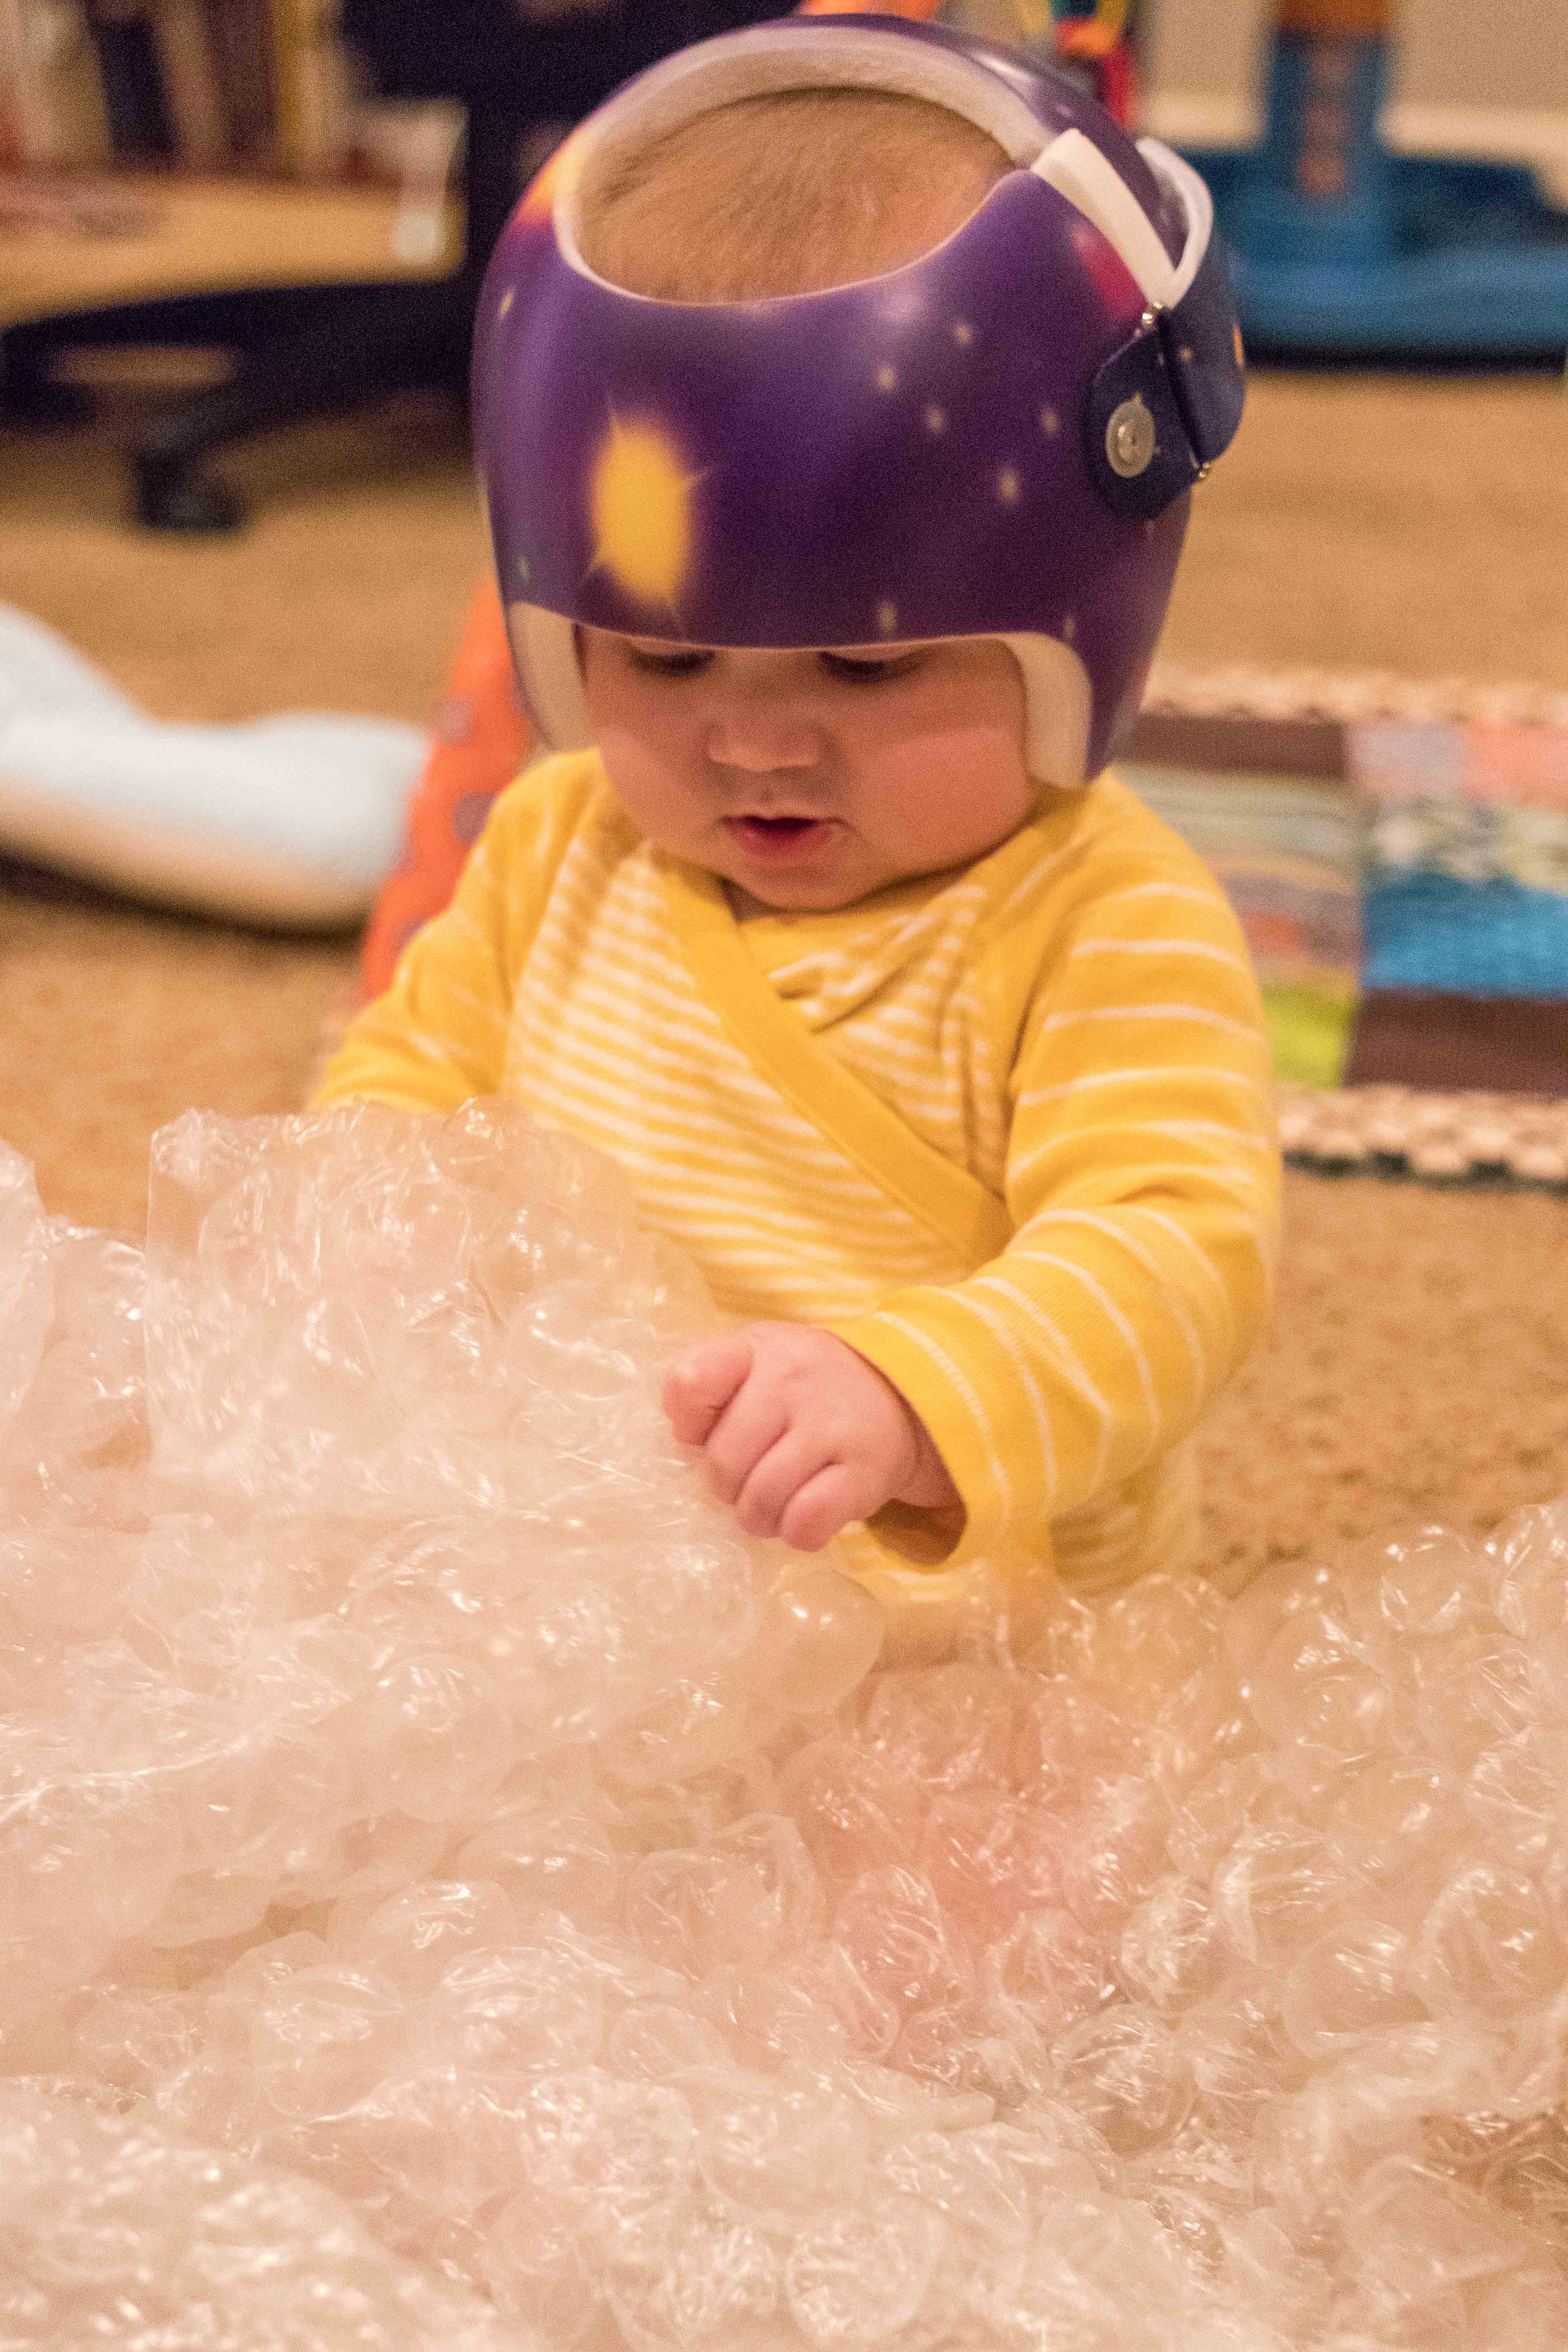 Tommy in His Helmet with the Bubble Wrap 3.7.18 | https://www.roseclearfield.com